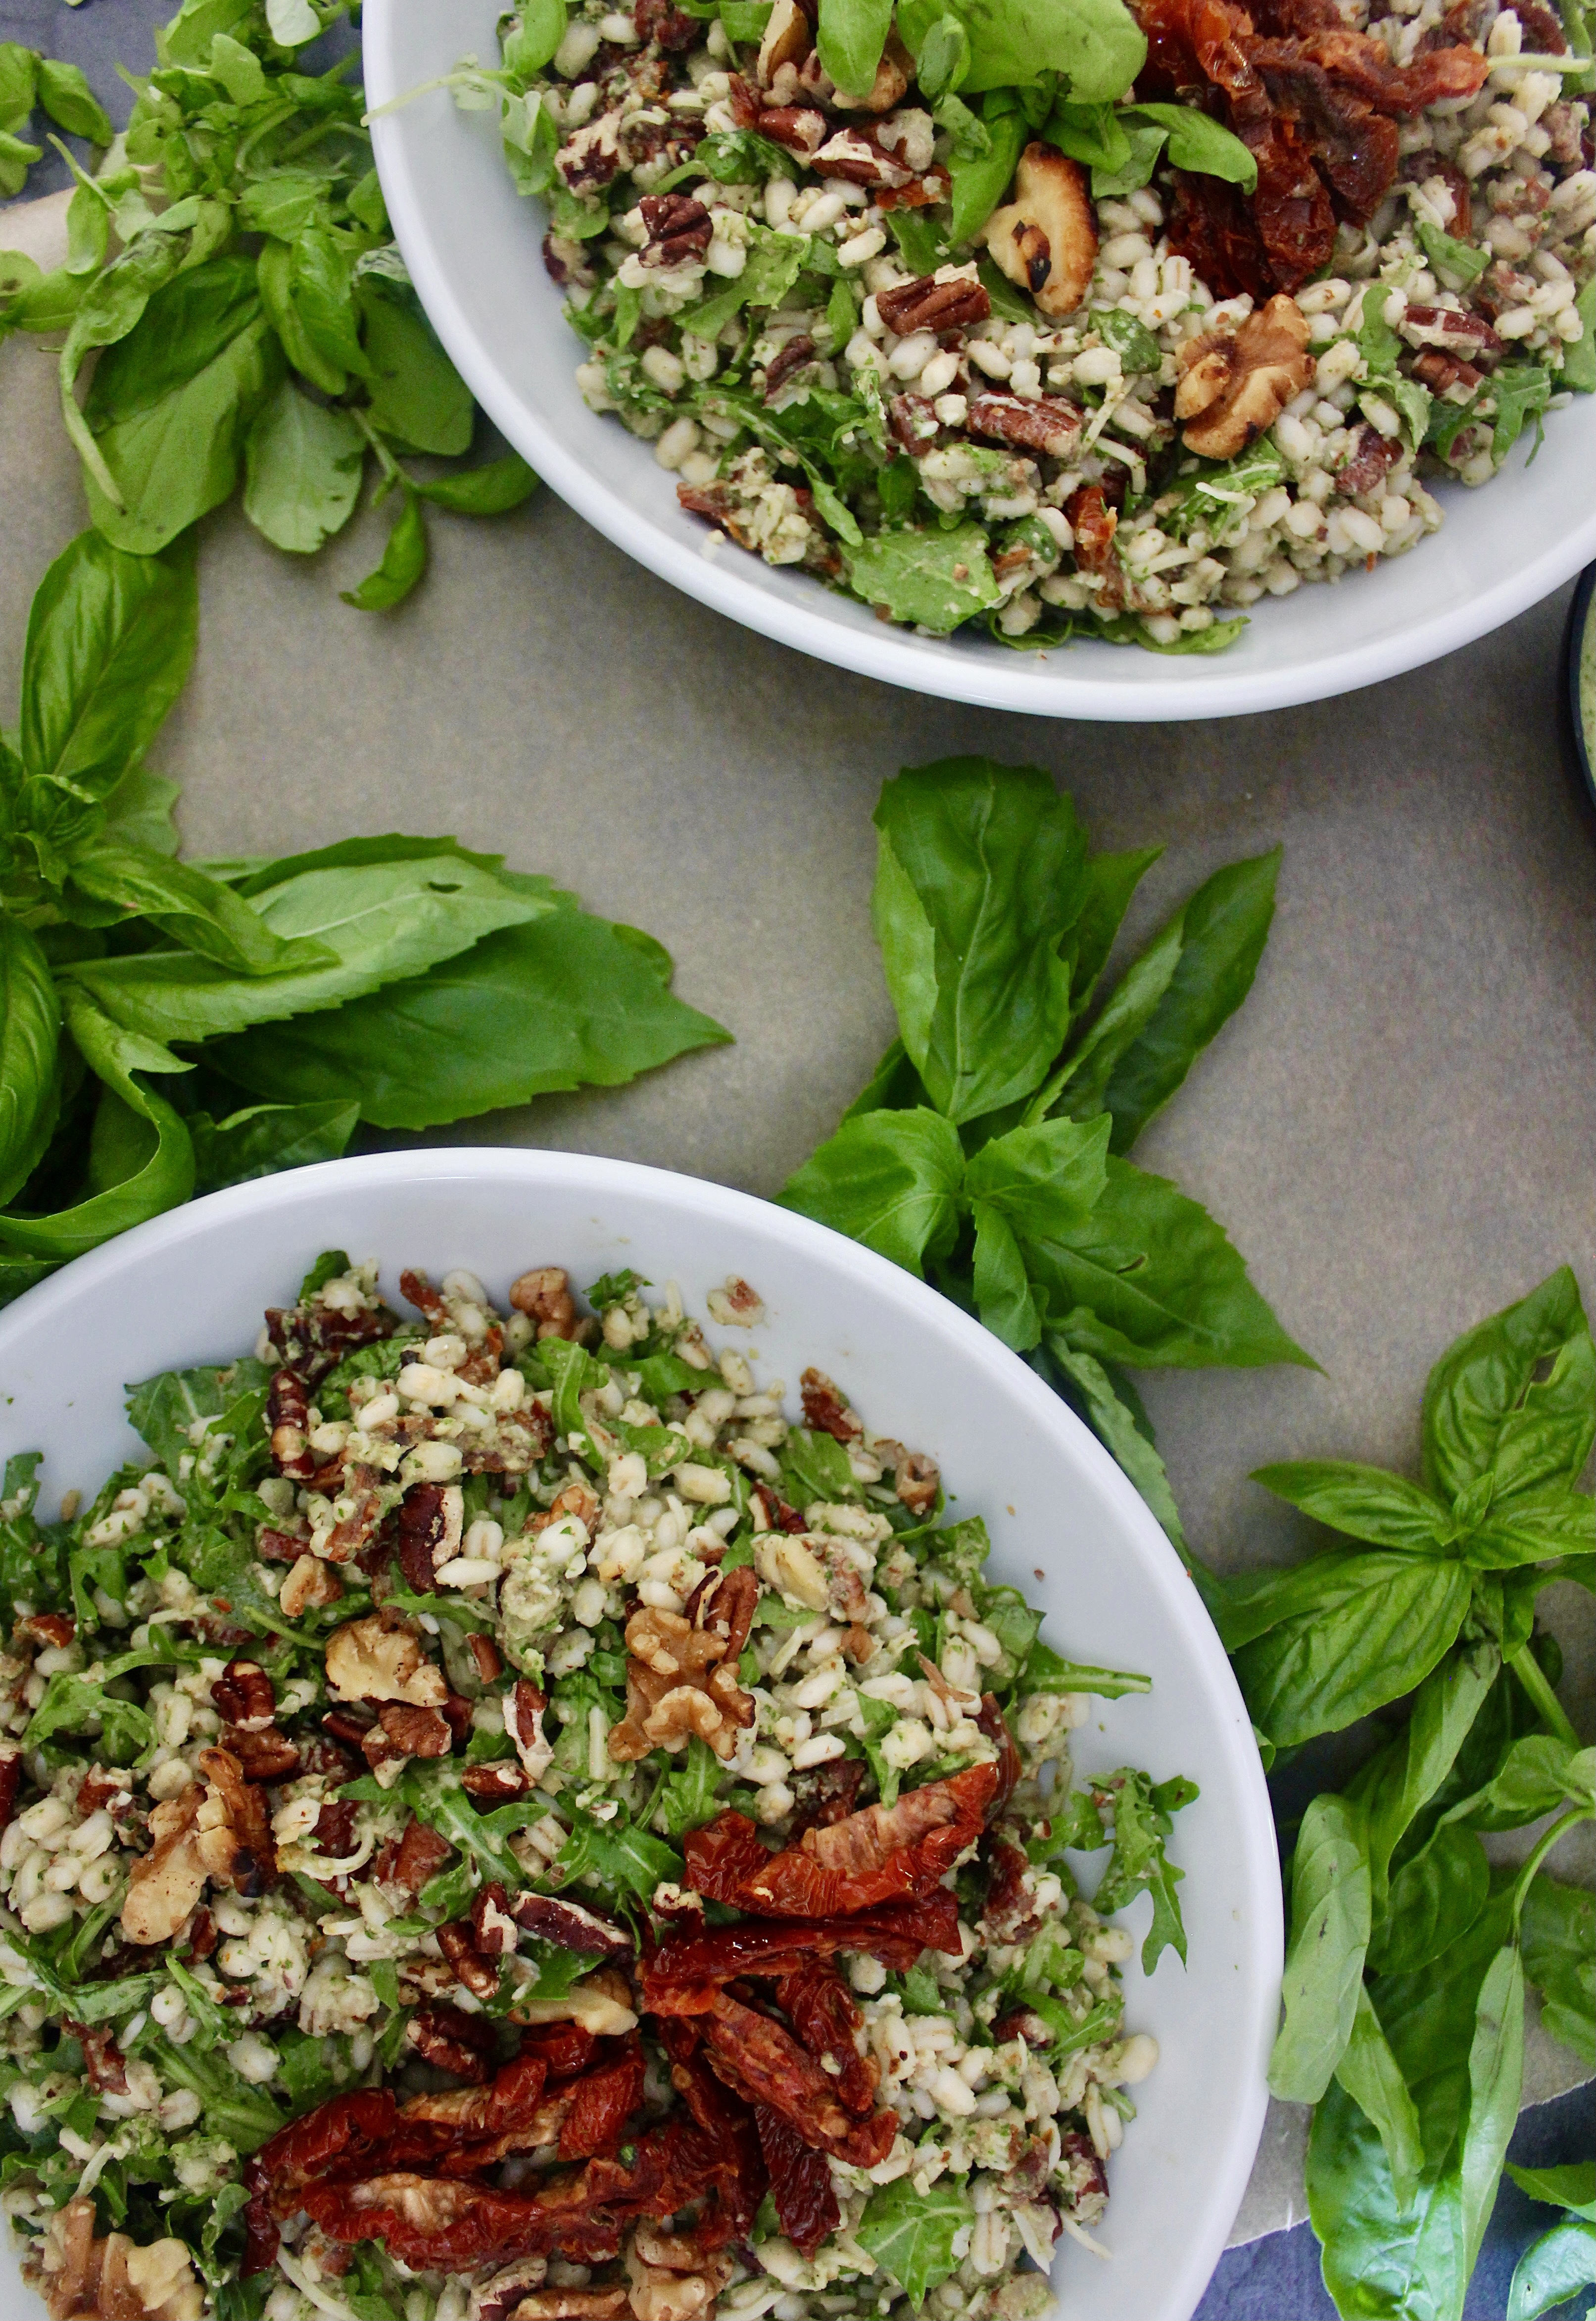 \The easy, nutrient-packed, and oh-so flavorful bulgur salad loaded with parmesan, arugula, and walnuts: this Basil Pesto and Sun Dried Tomato Bulgur Salad is one of my go-to recipes!!